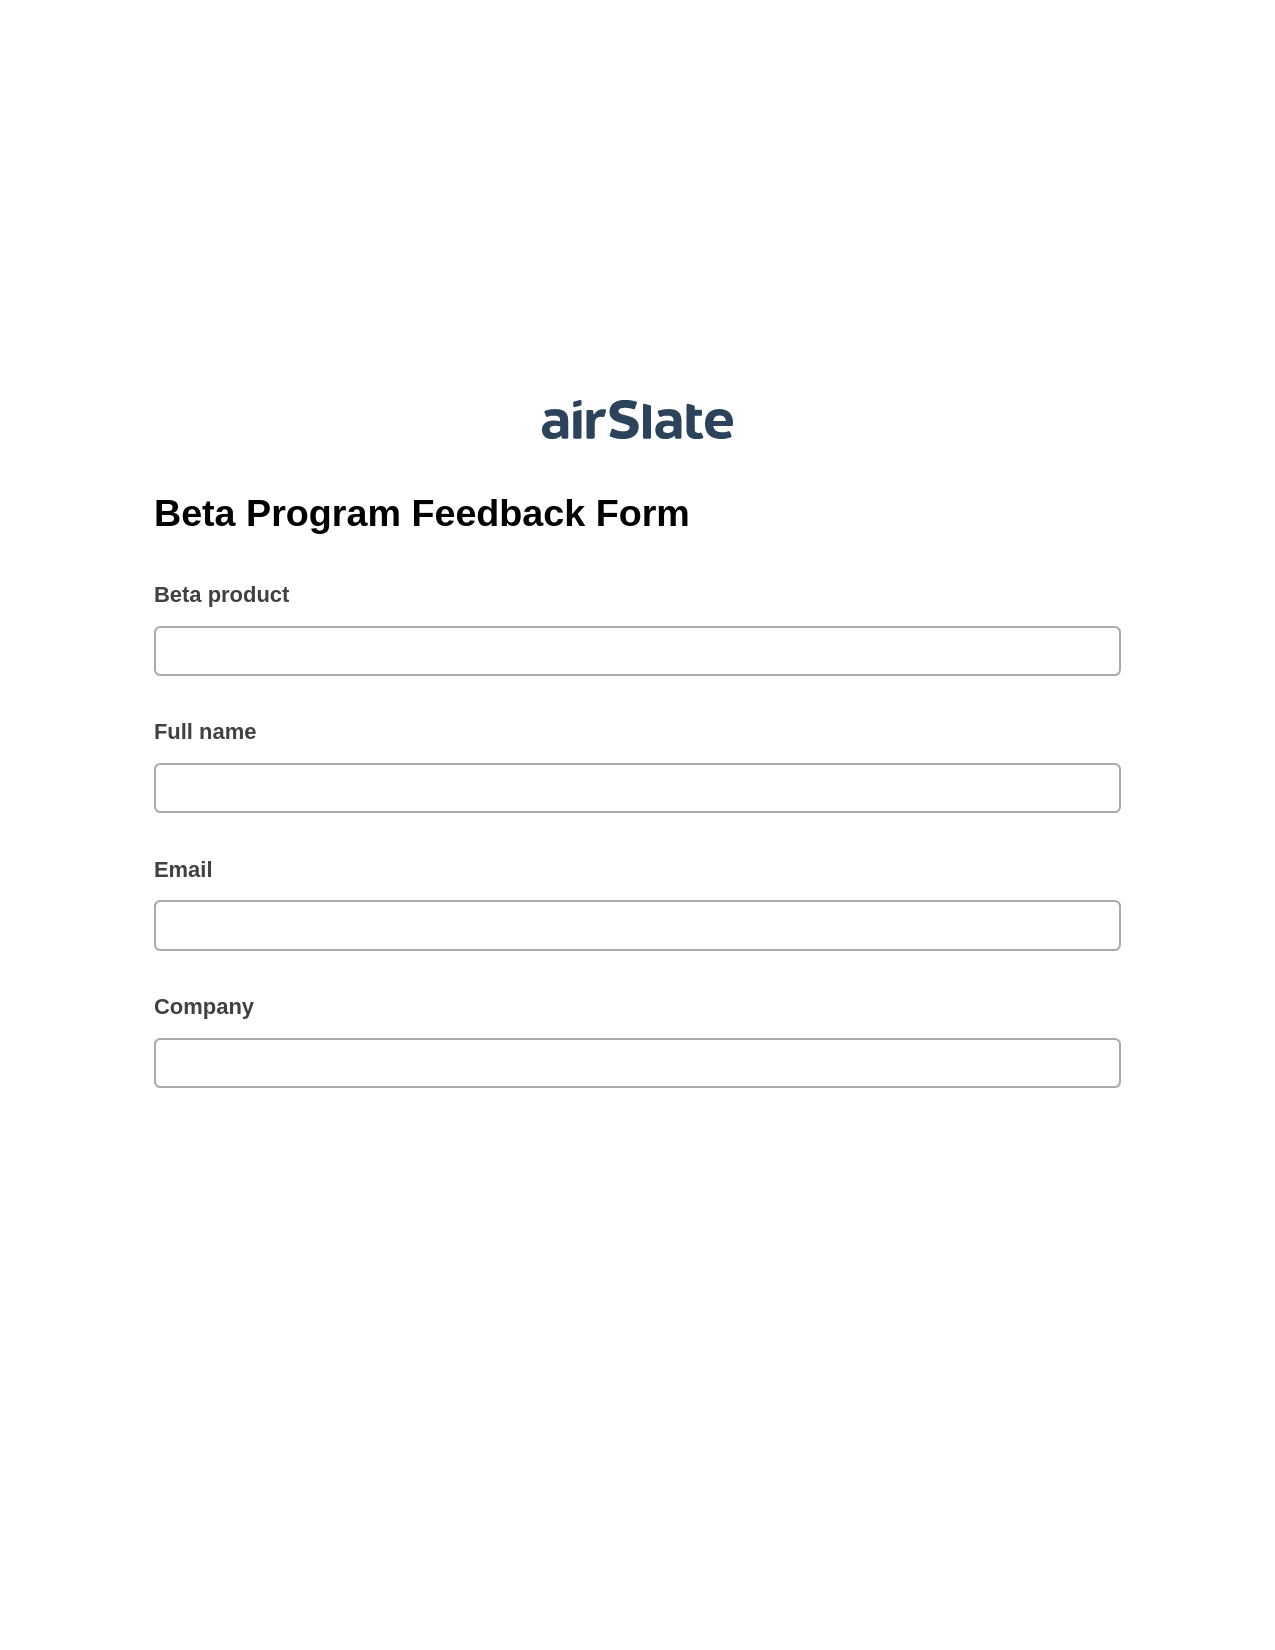 Beta Program Feedback Form Pre-fill Dropdown from Airtable, Send a Slate with Roles Bot, Box Bot